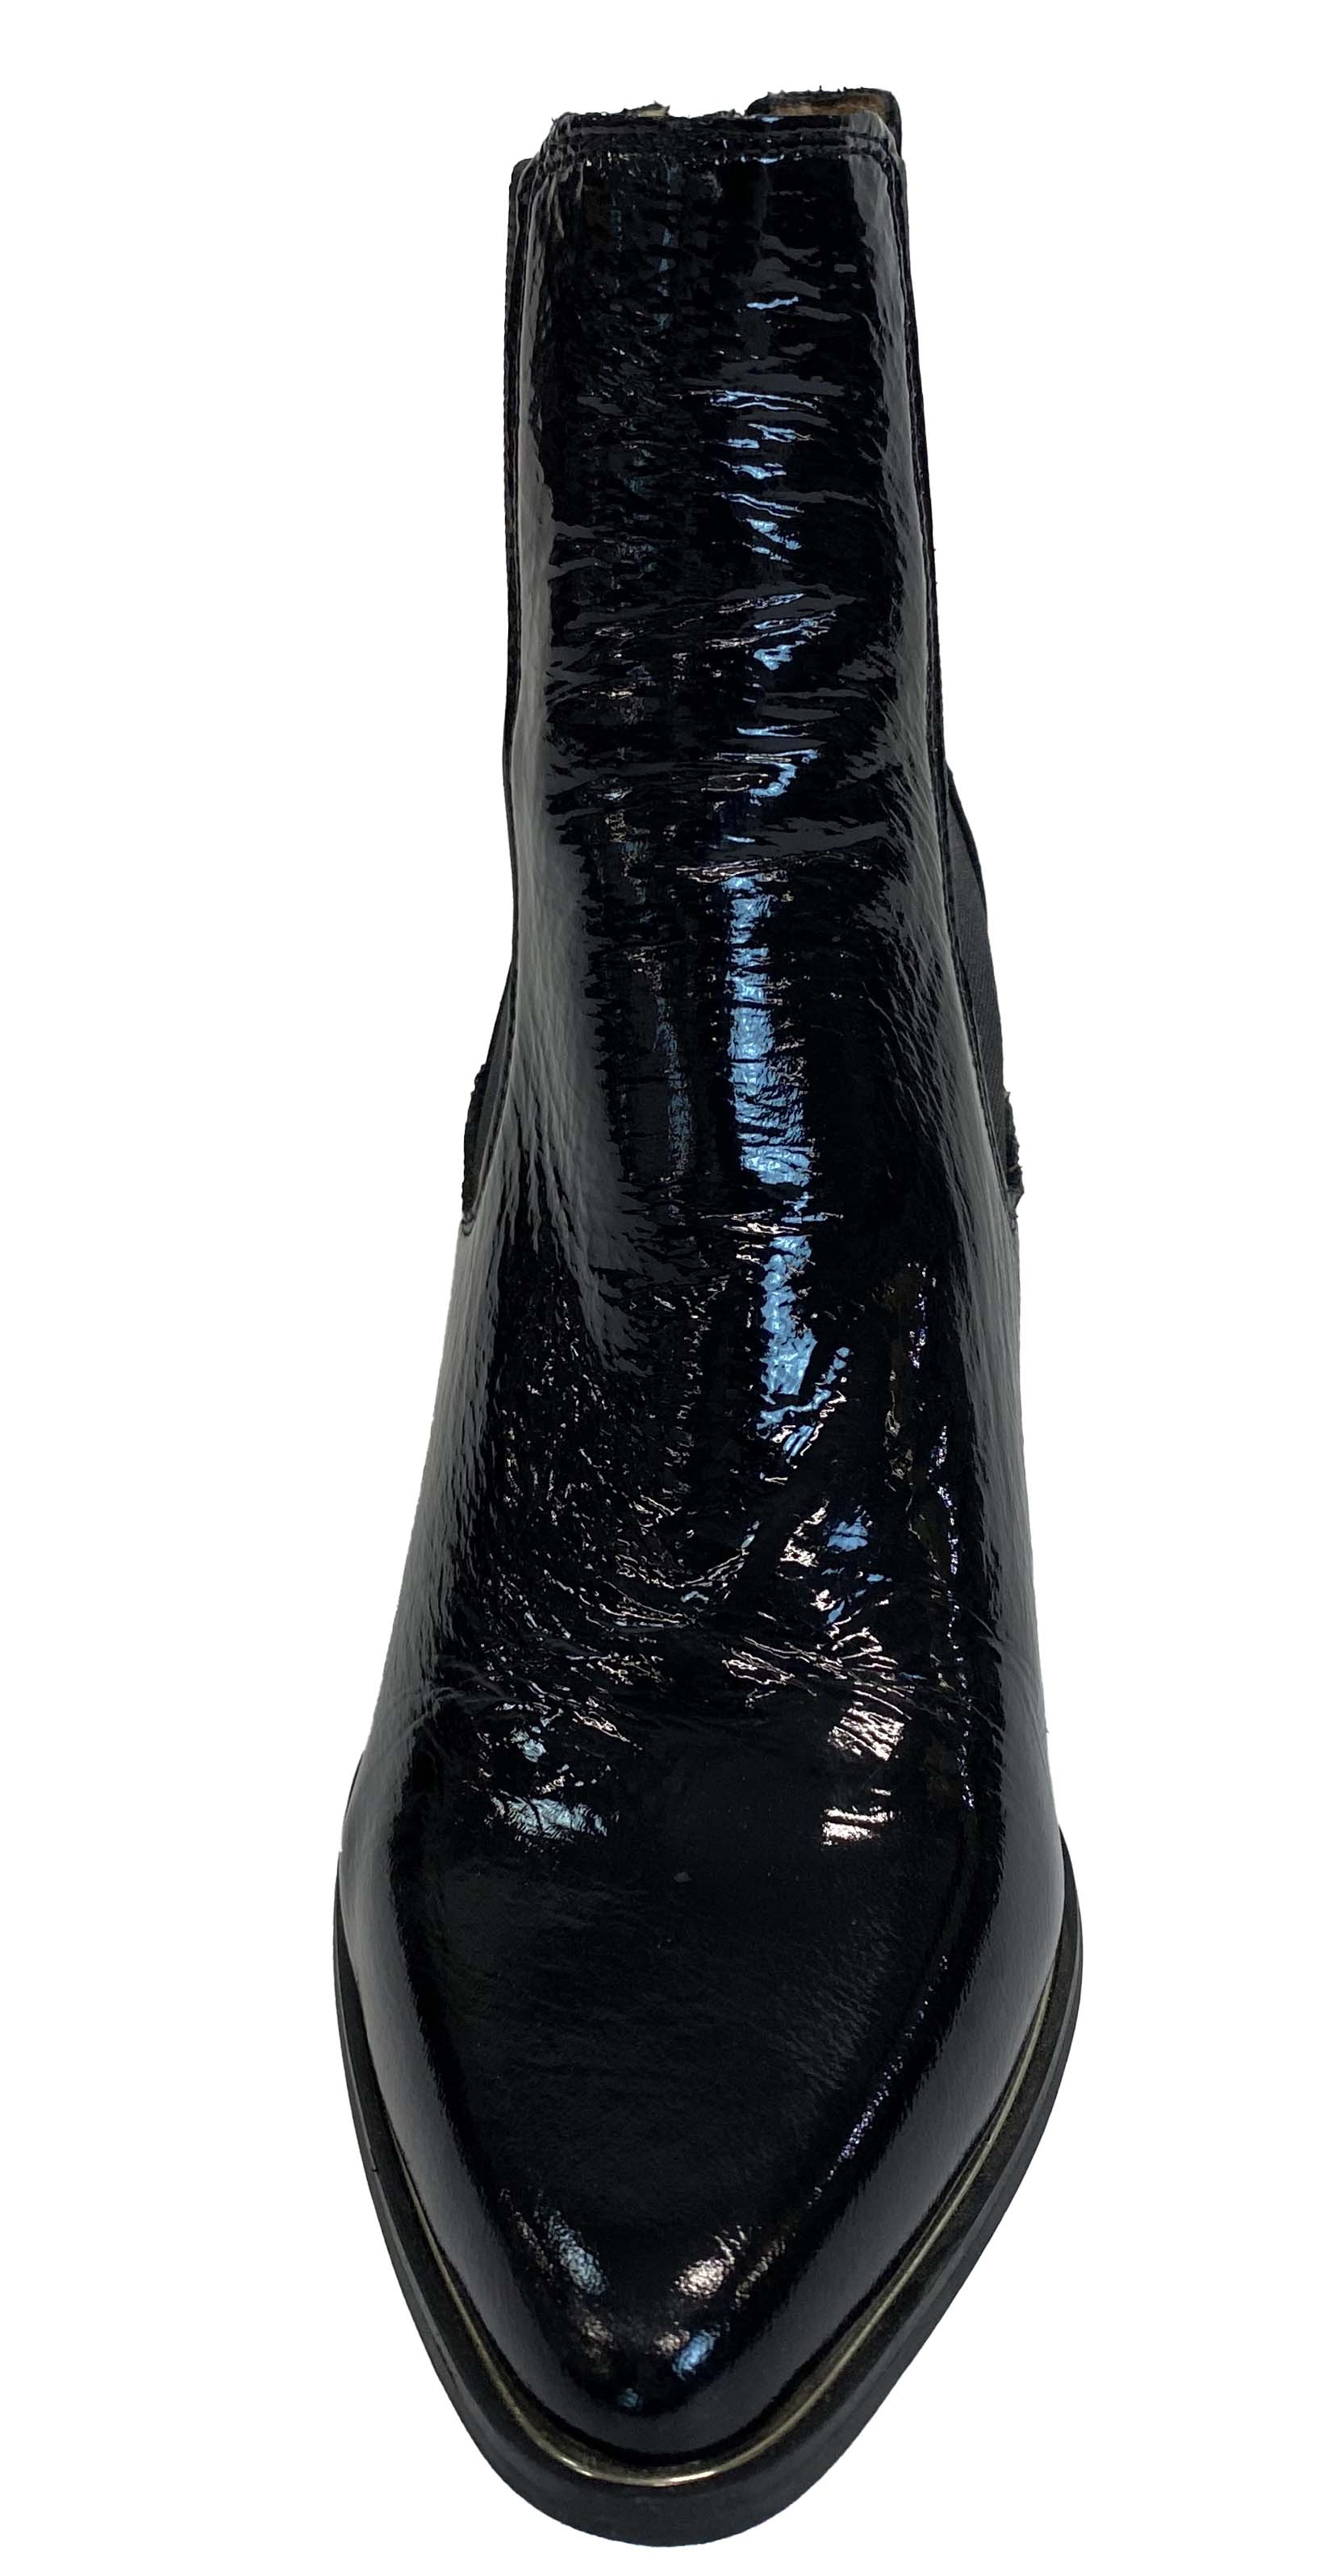 JO MERCER Patent Leather Boots 